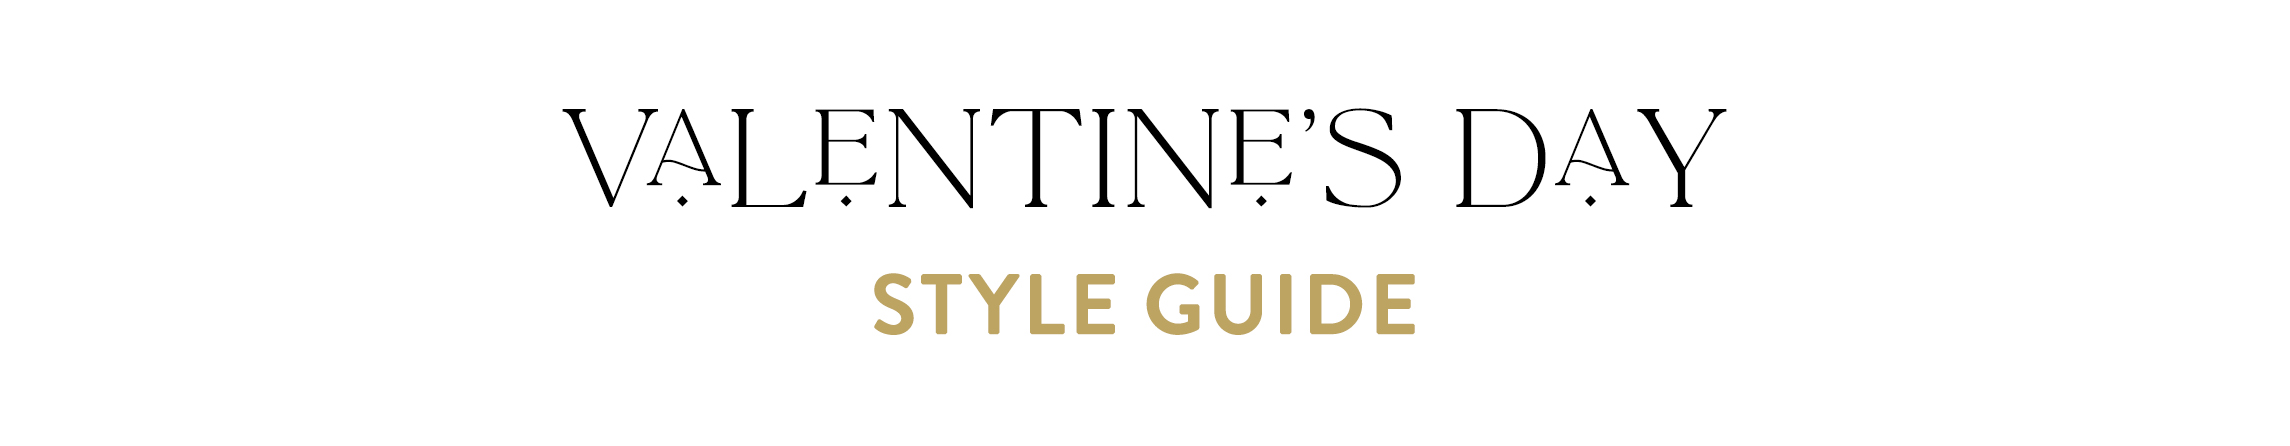 valentines day style guide